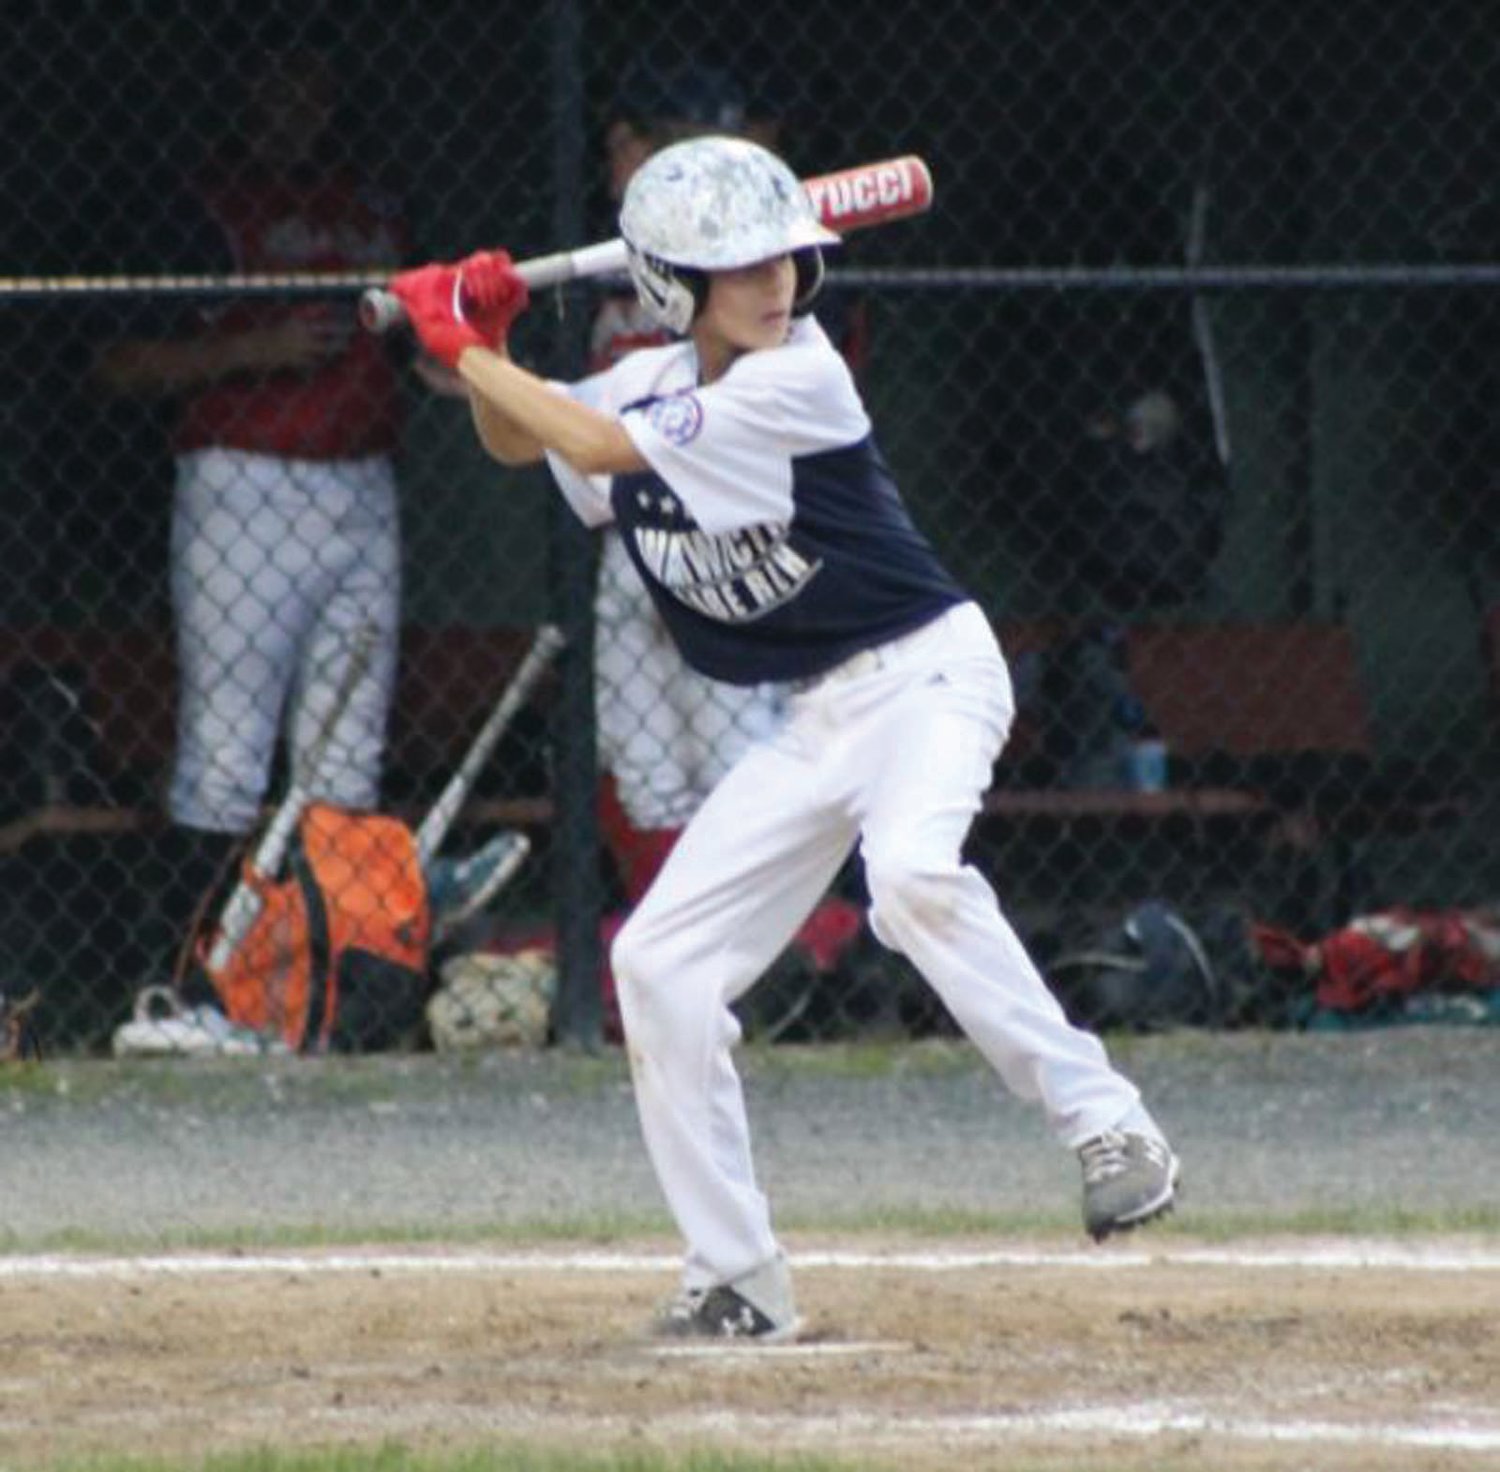 AT THE PLATE: Warwick PAL’s Michael Mainelli. (Submitted photo)